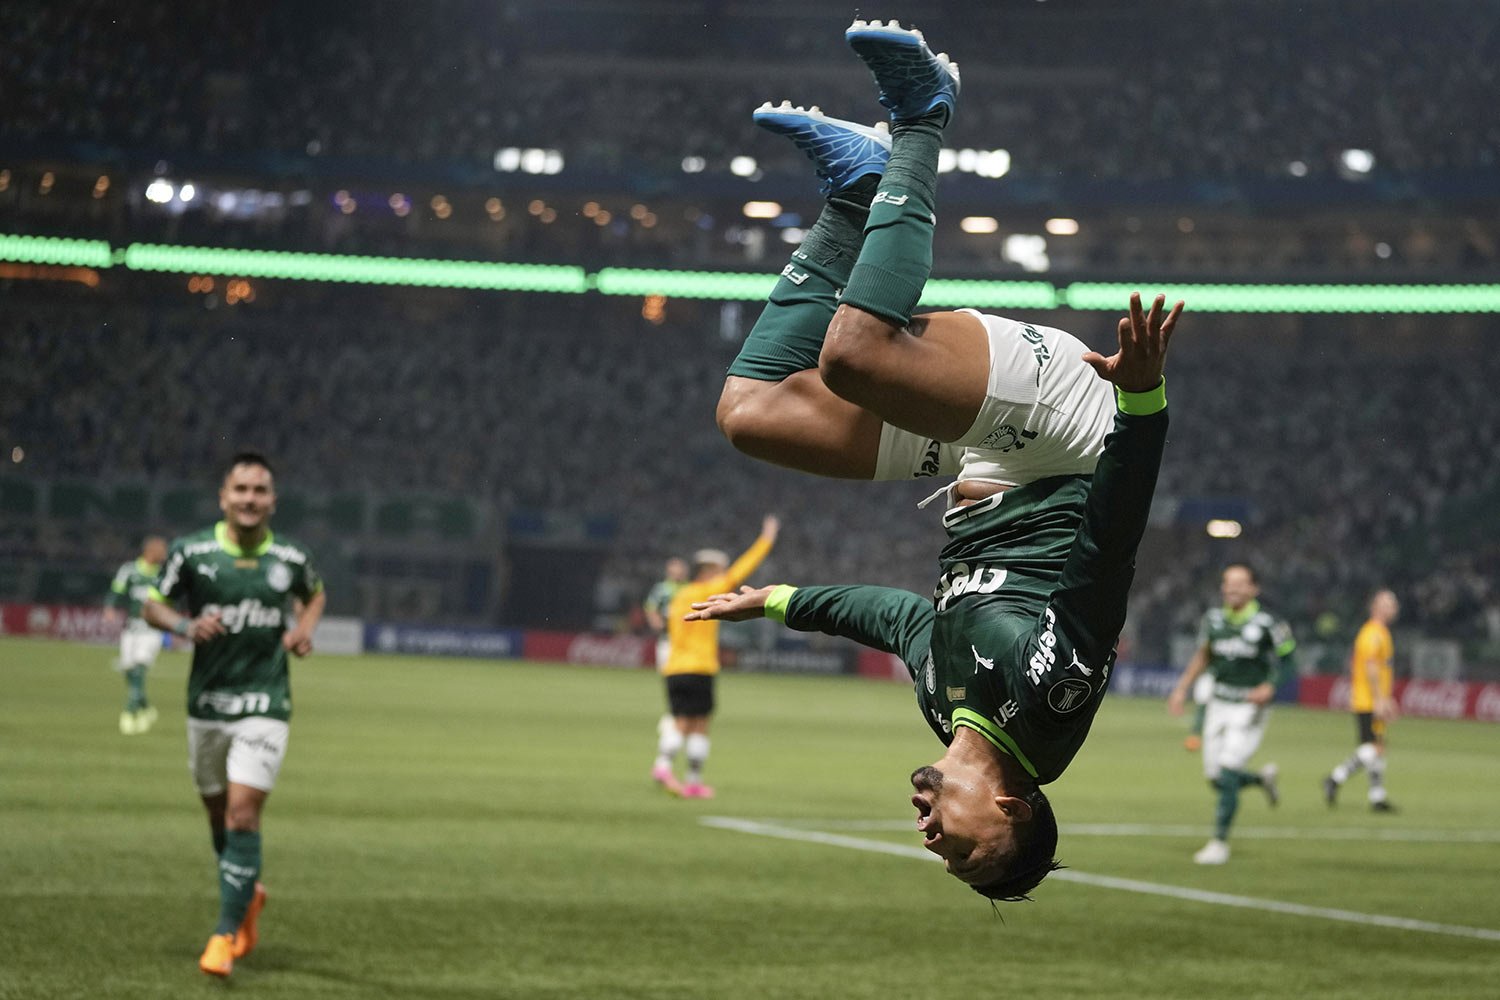  Rony of Brazil's Palmeiras does a backflip as he celebrates a goal that was later disallowed by the referee for an offside decision during a Copa Libertadores Group C soccer match against Ecuador's Barcelona at the Allianz Parque stadium in Sao Paul